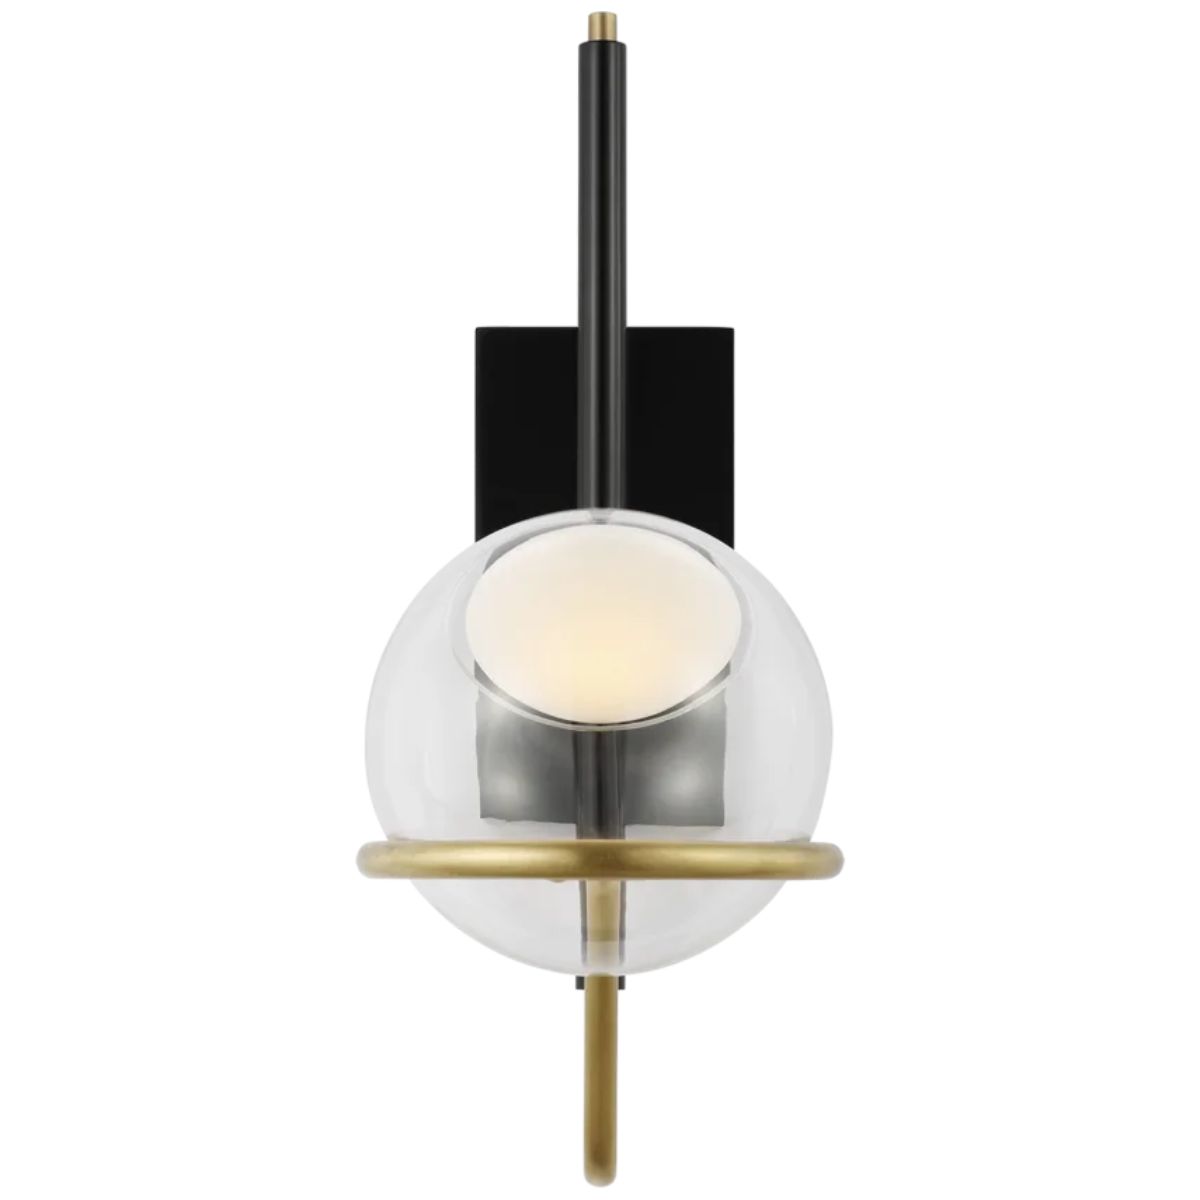 Crosby 18 in. LED Wall Sconce 277V Black & Natural Brass finish